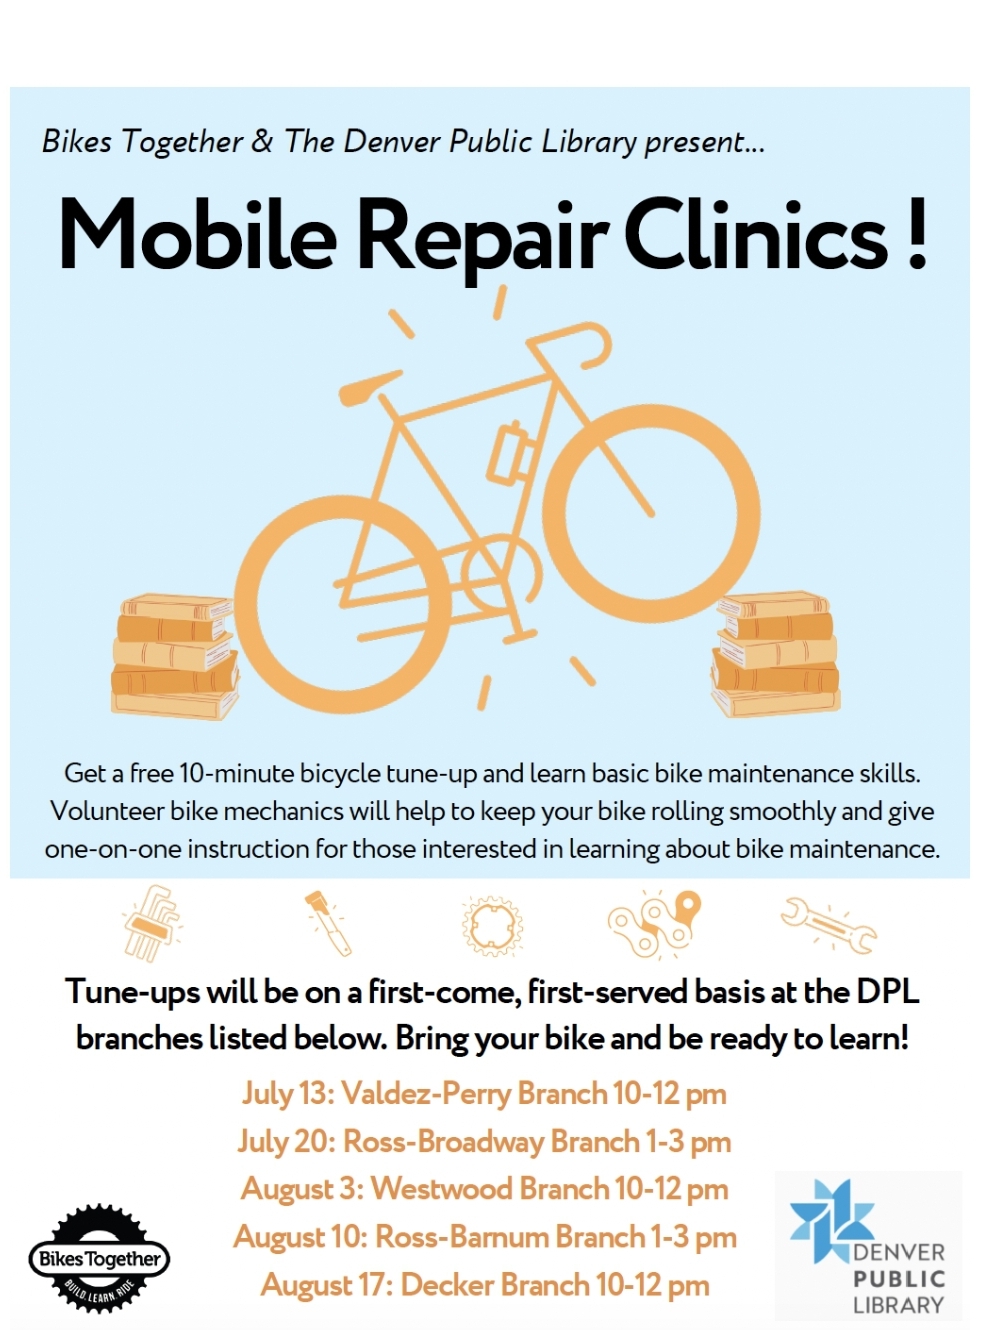 Image is a flyer with information about Bikes Together Mobile Repair clinics